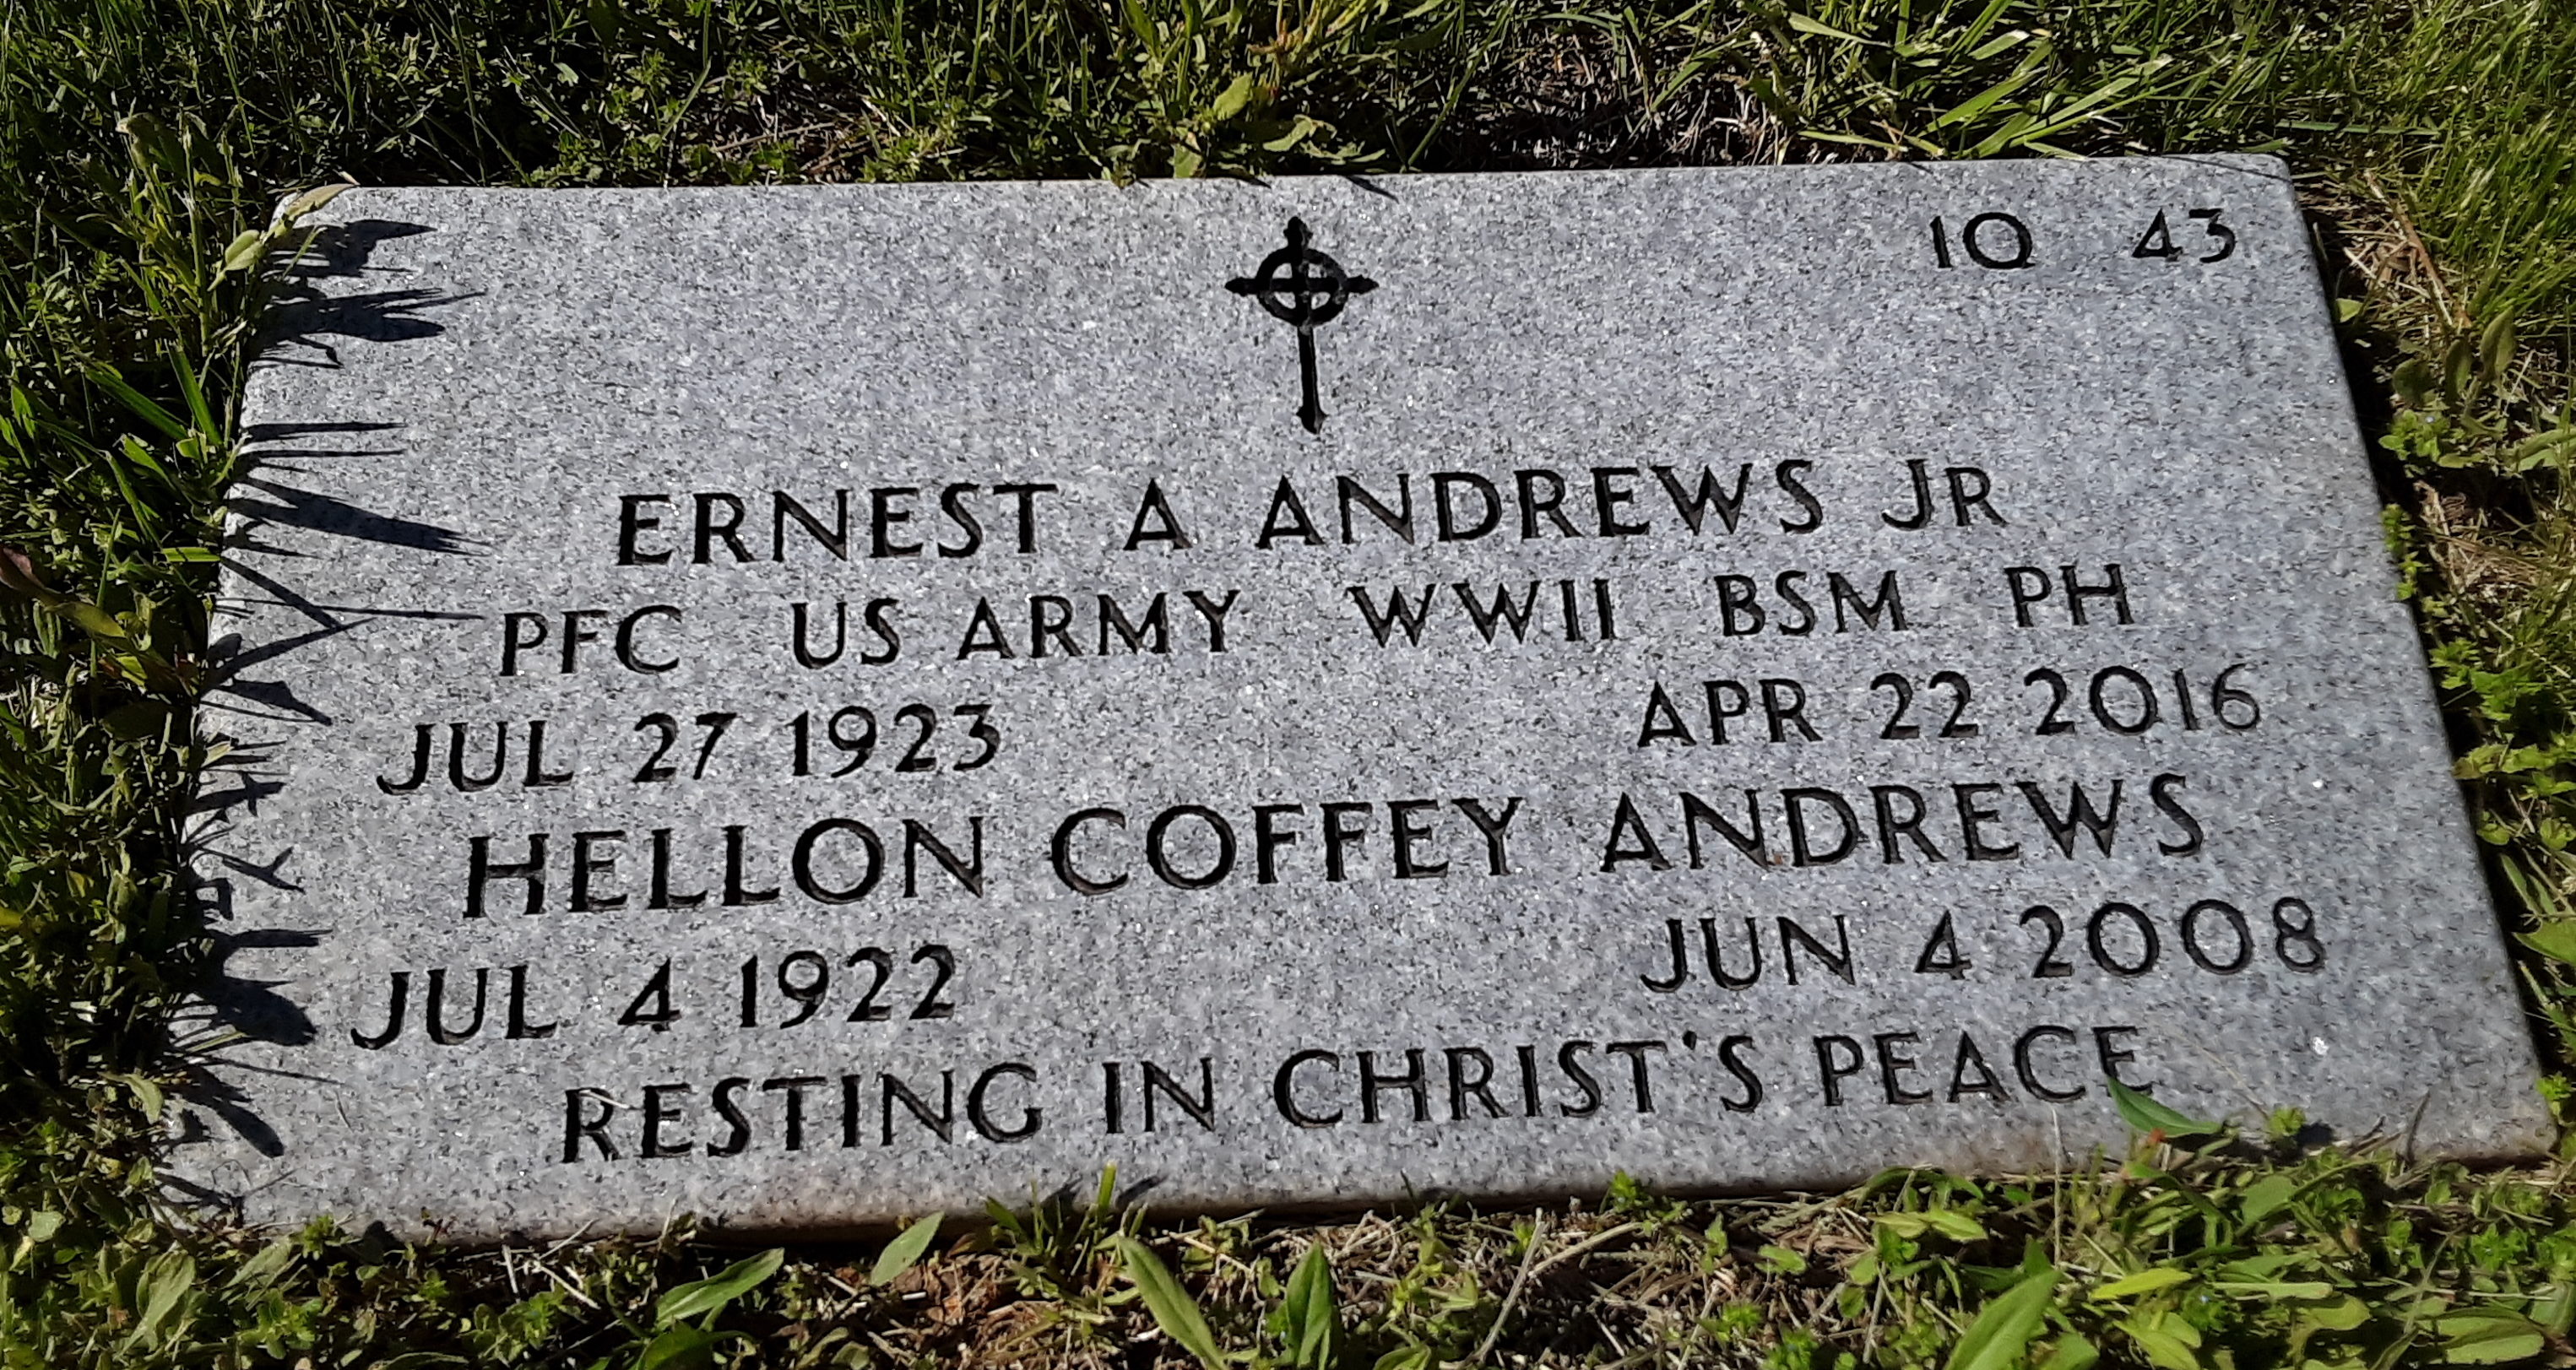 Grave of Andy Andrews and his wife in Black Mountain, NC (Photo by Jon Brown/The Daily Caller)